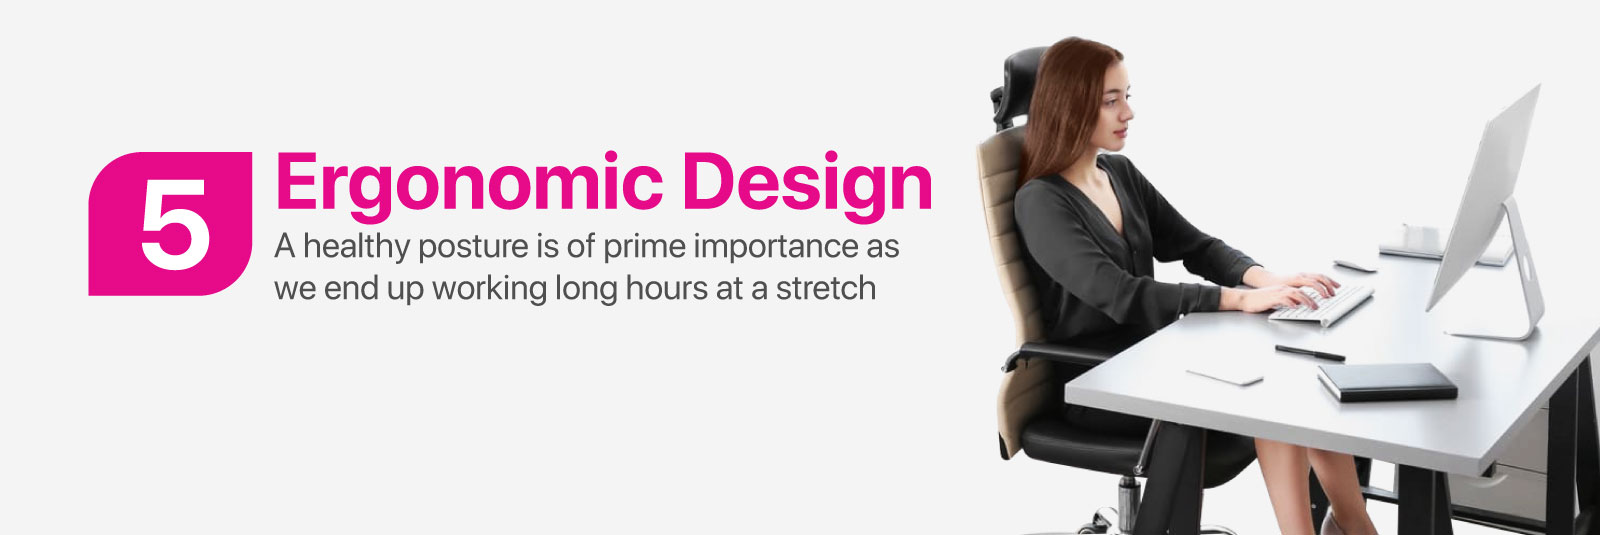 Ergonomic Design - A healthy posture is of prime importance as we end up working long hours at a stretch